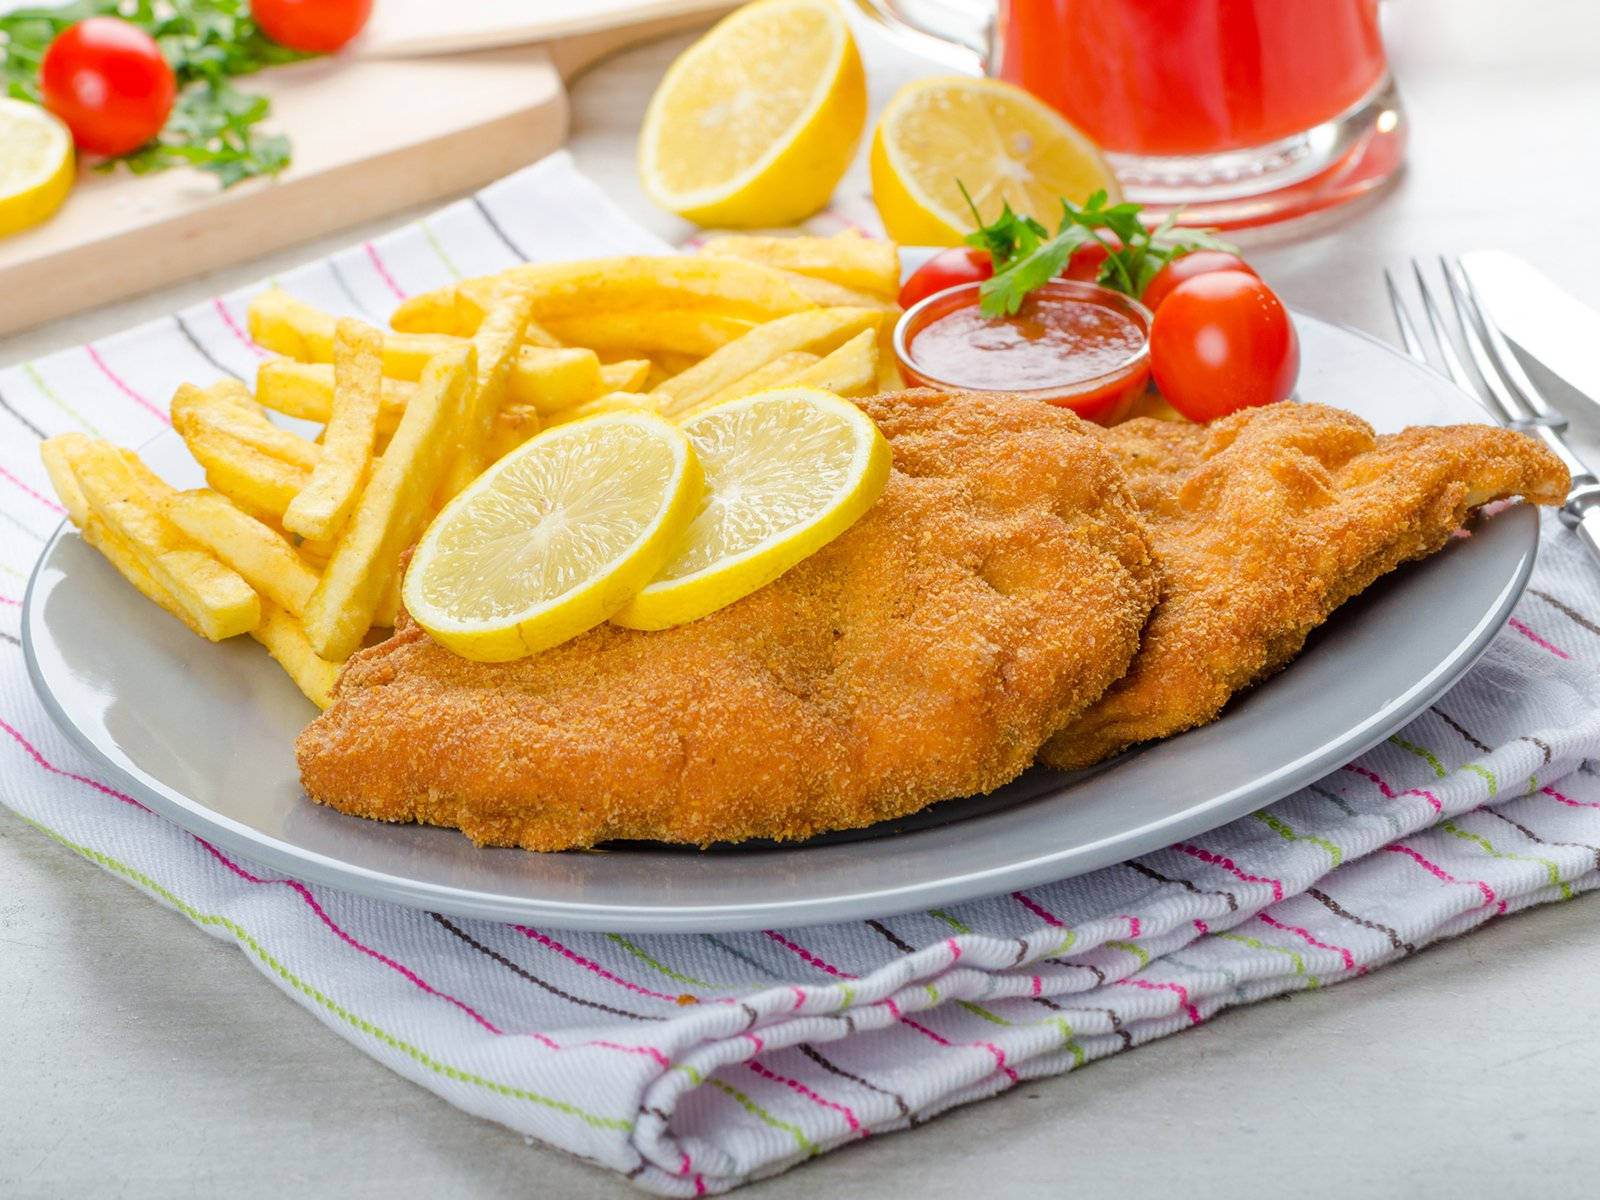 Läckerwiener Schnitzel (this Translation Is Not Related To Computer Or Mobile Wallpaper. To Translate In Context Of Computer Or Mobile Wallpaper, Please Provide Relevant Sentences.) Wallpaper